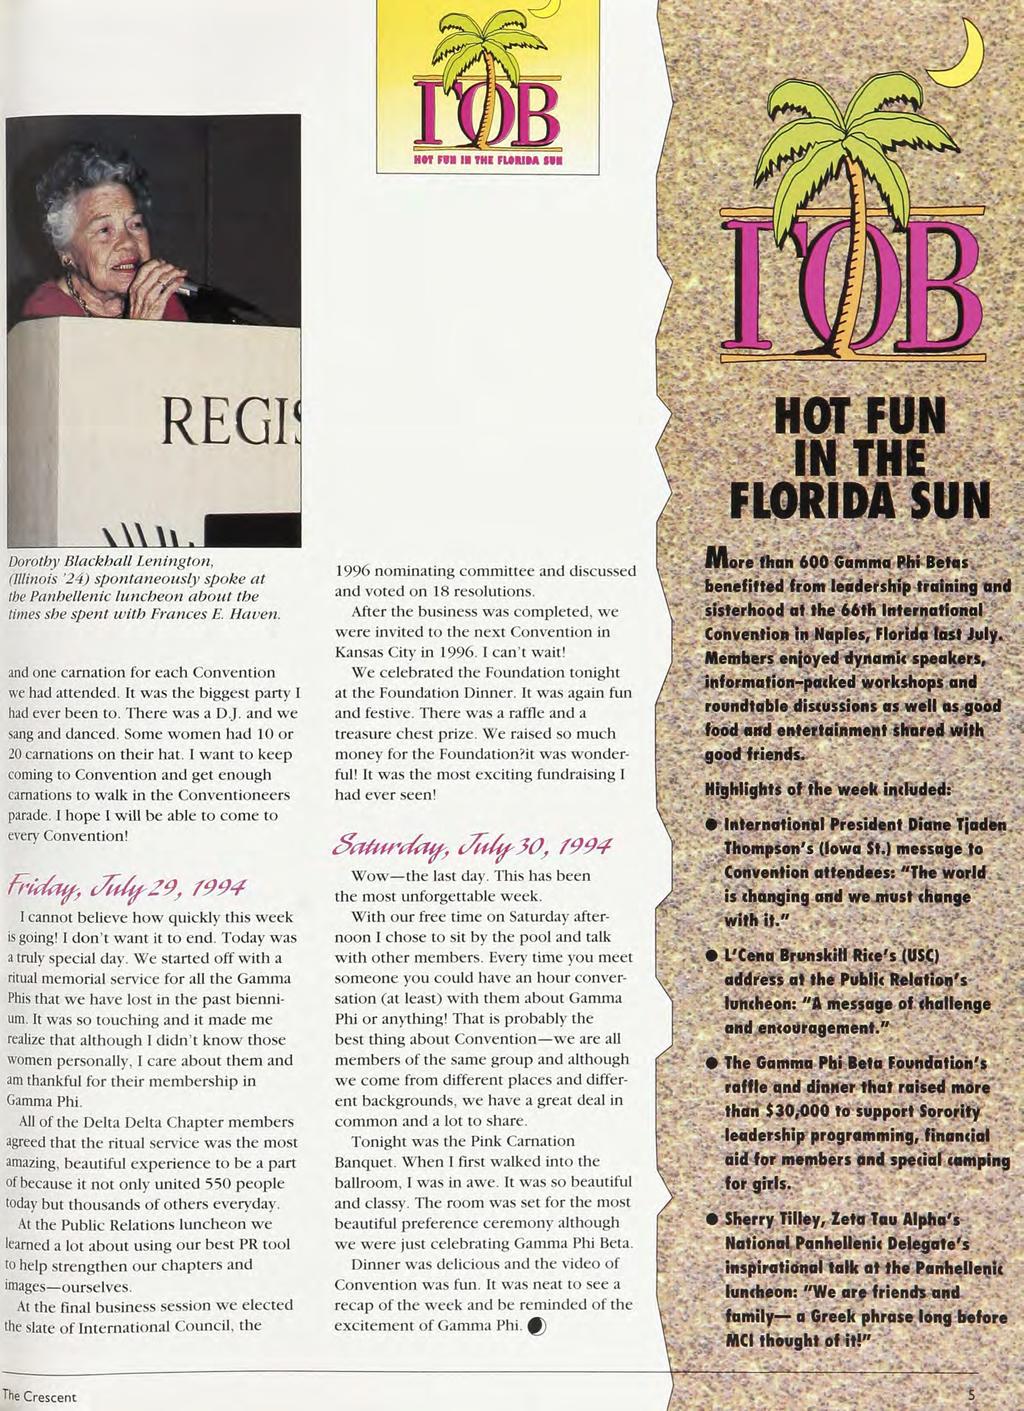 , Convention Hn Fil II THI FUUM lil HOT FUN IN THE FLORIDA SUN Dorothy Blackball Lenington, (Illinois '24) spontaneously spoke at tbe Panhellenic luncheon about the times she spent with Frances E.